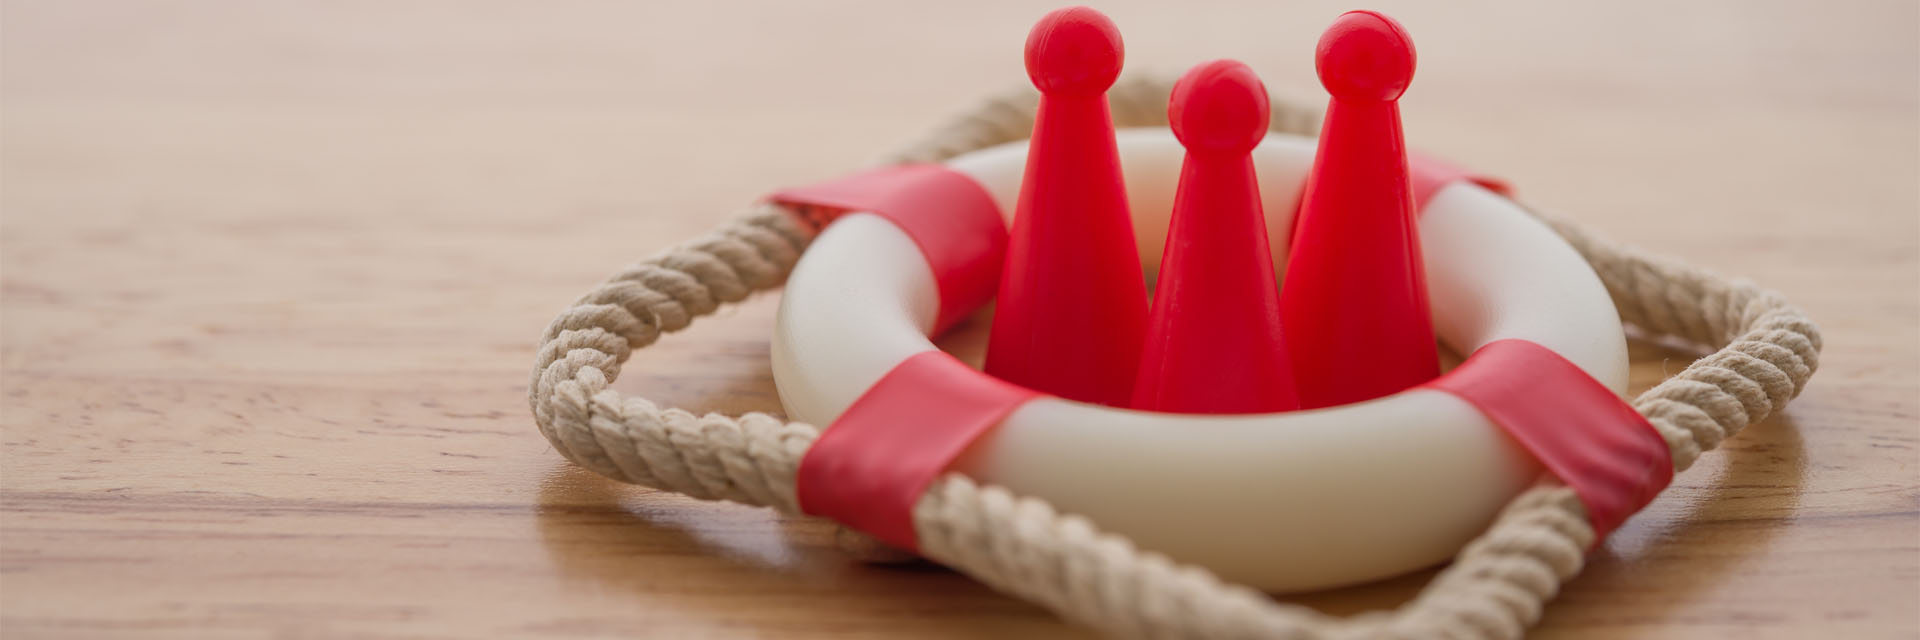 Image showing three red pawns inside of a model of a lifebuoy 